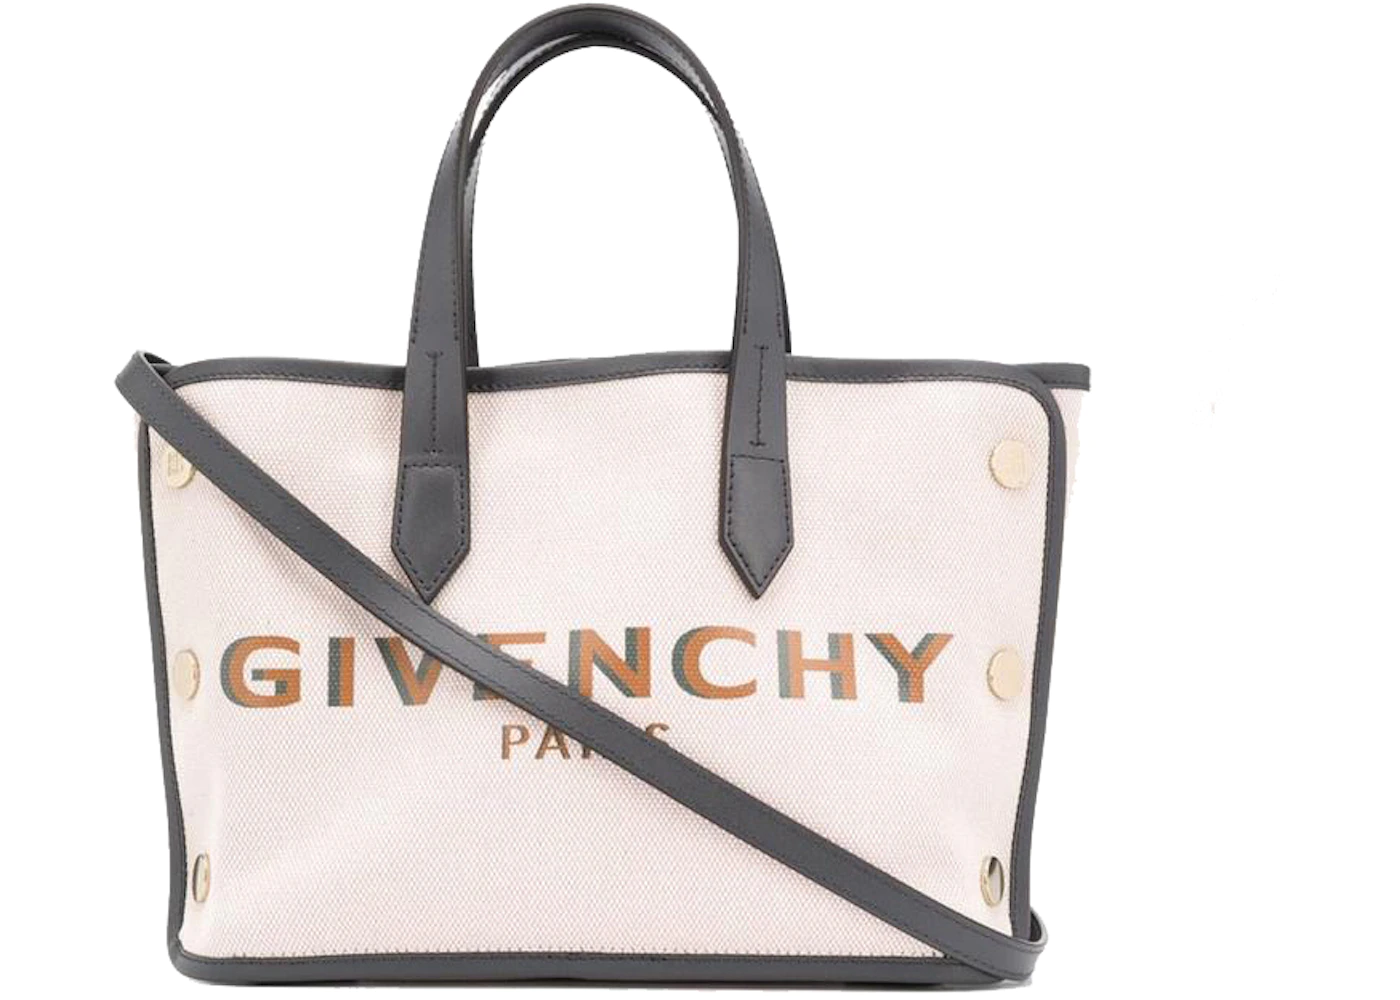 Givenchy Bond Shopper Bag Mini Pink/Grey in Canvas/Leather with Gold ...